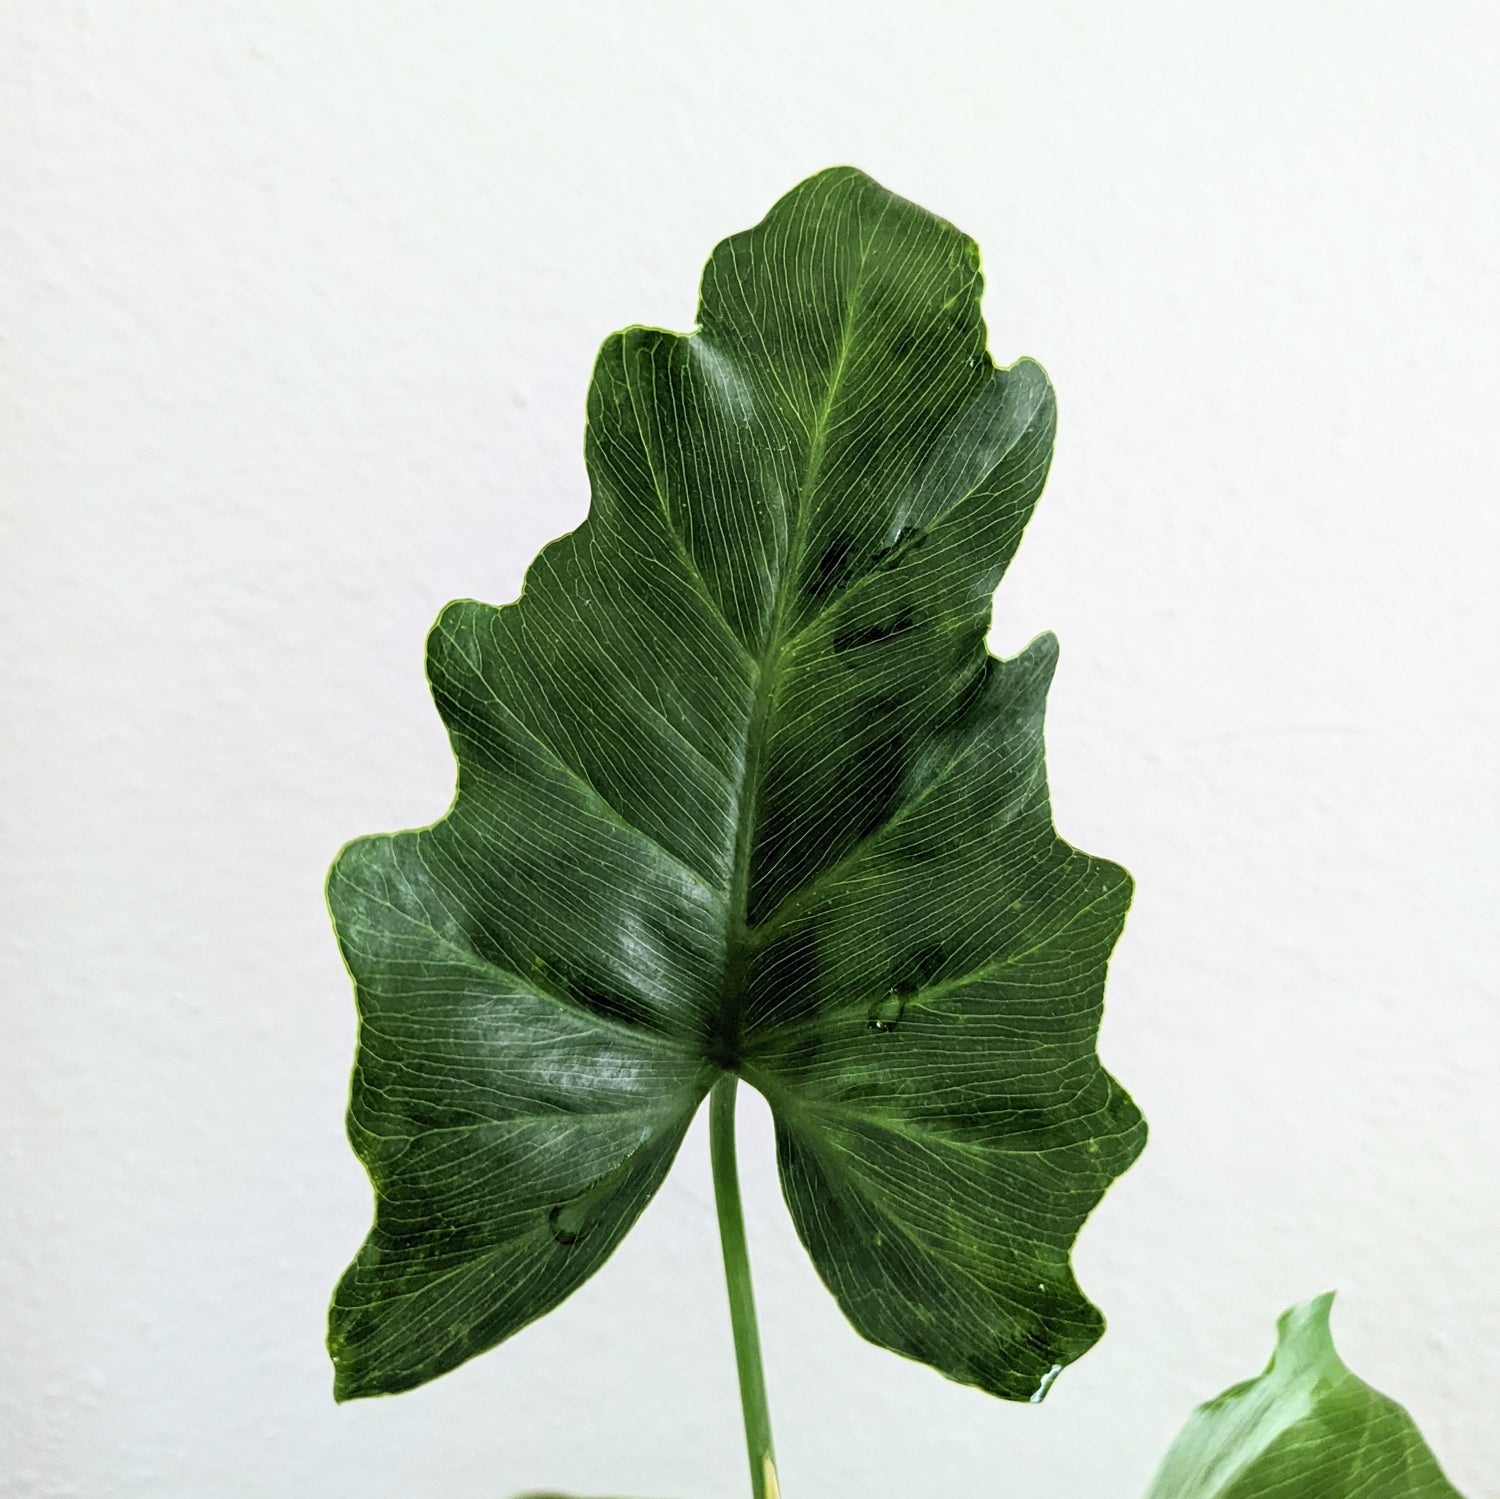 6 Awesome Lush and Large-Leafed Tropical Plants you Can Grow from Seed